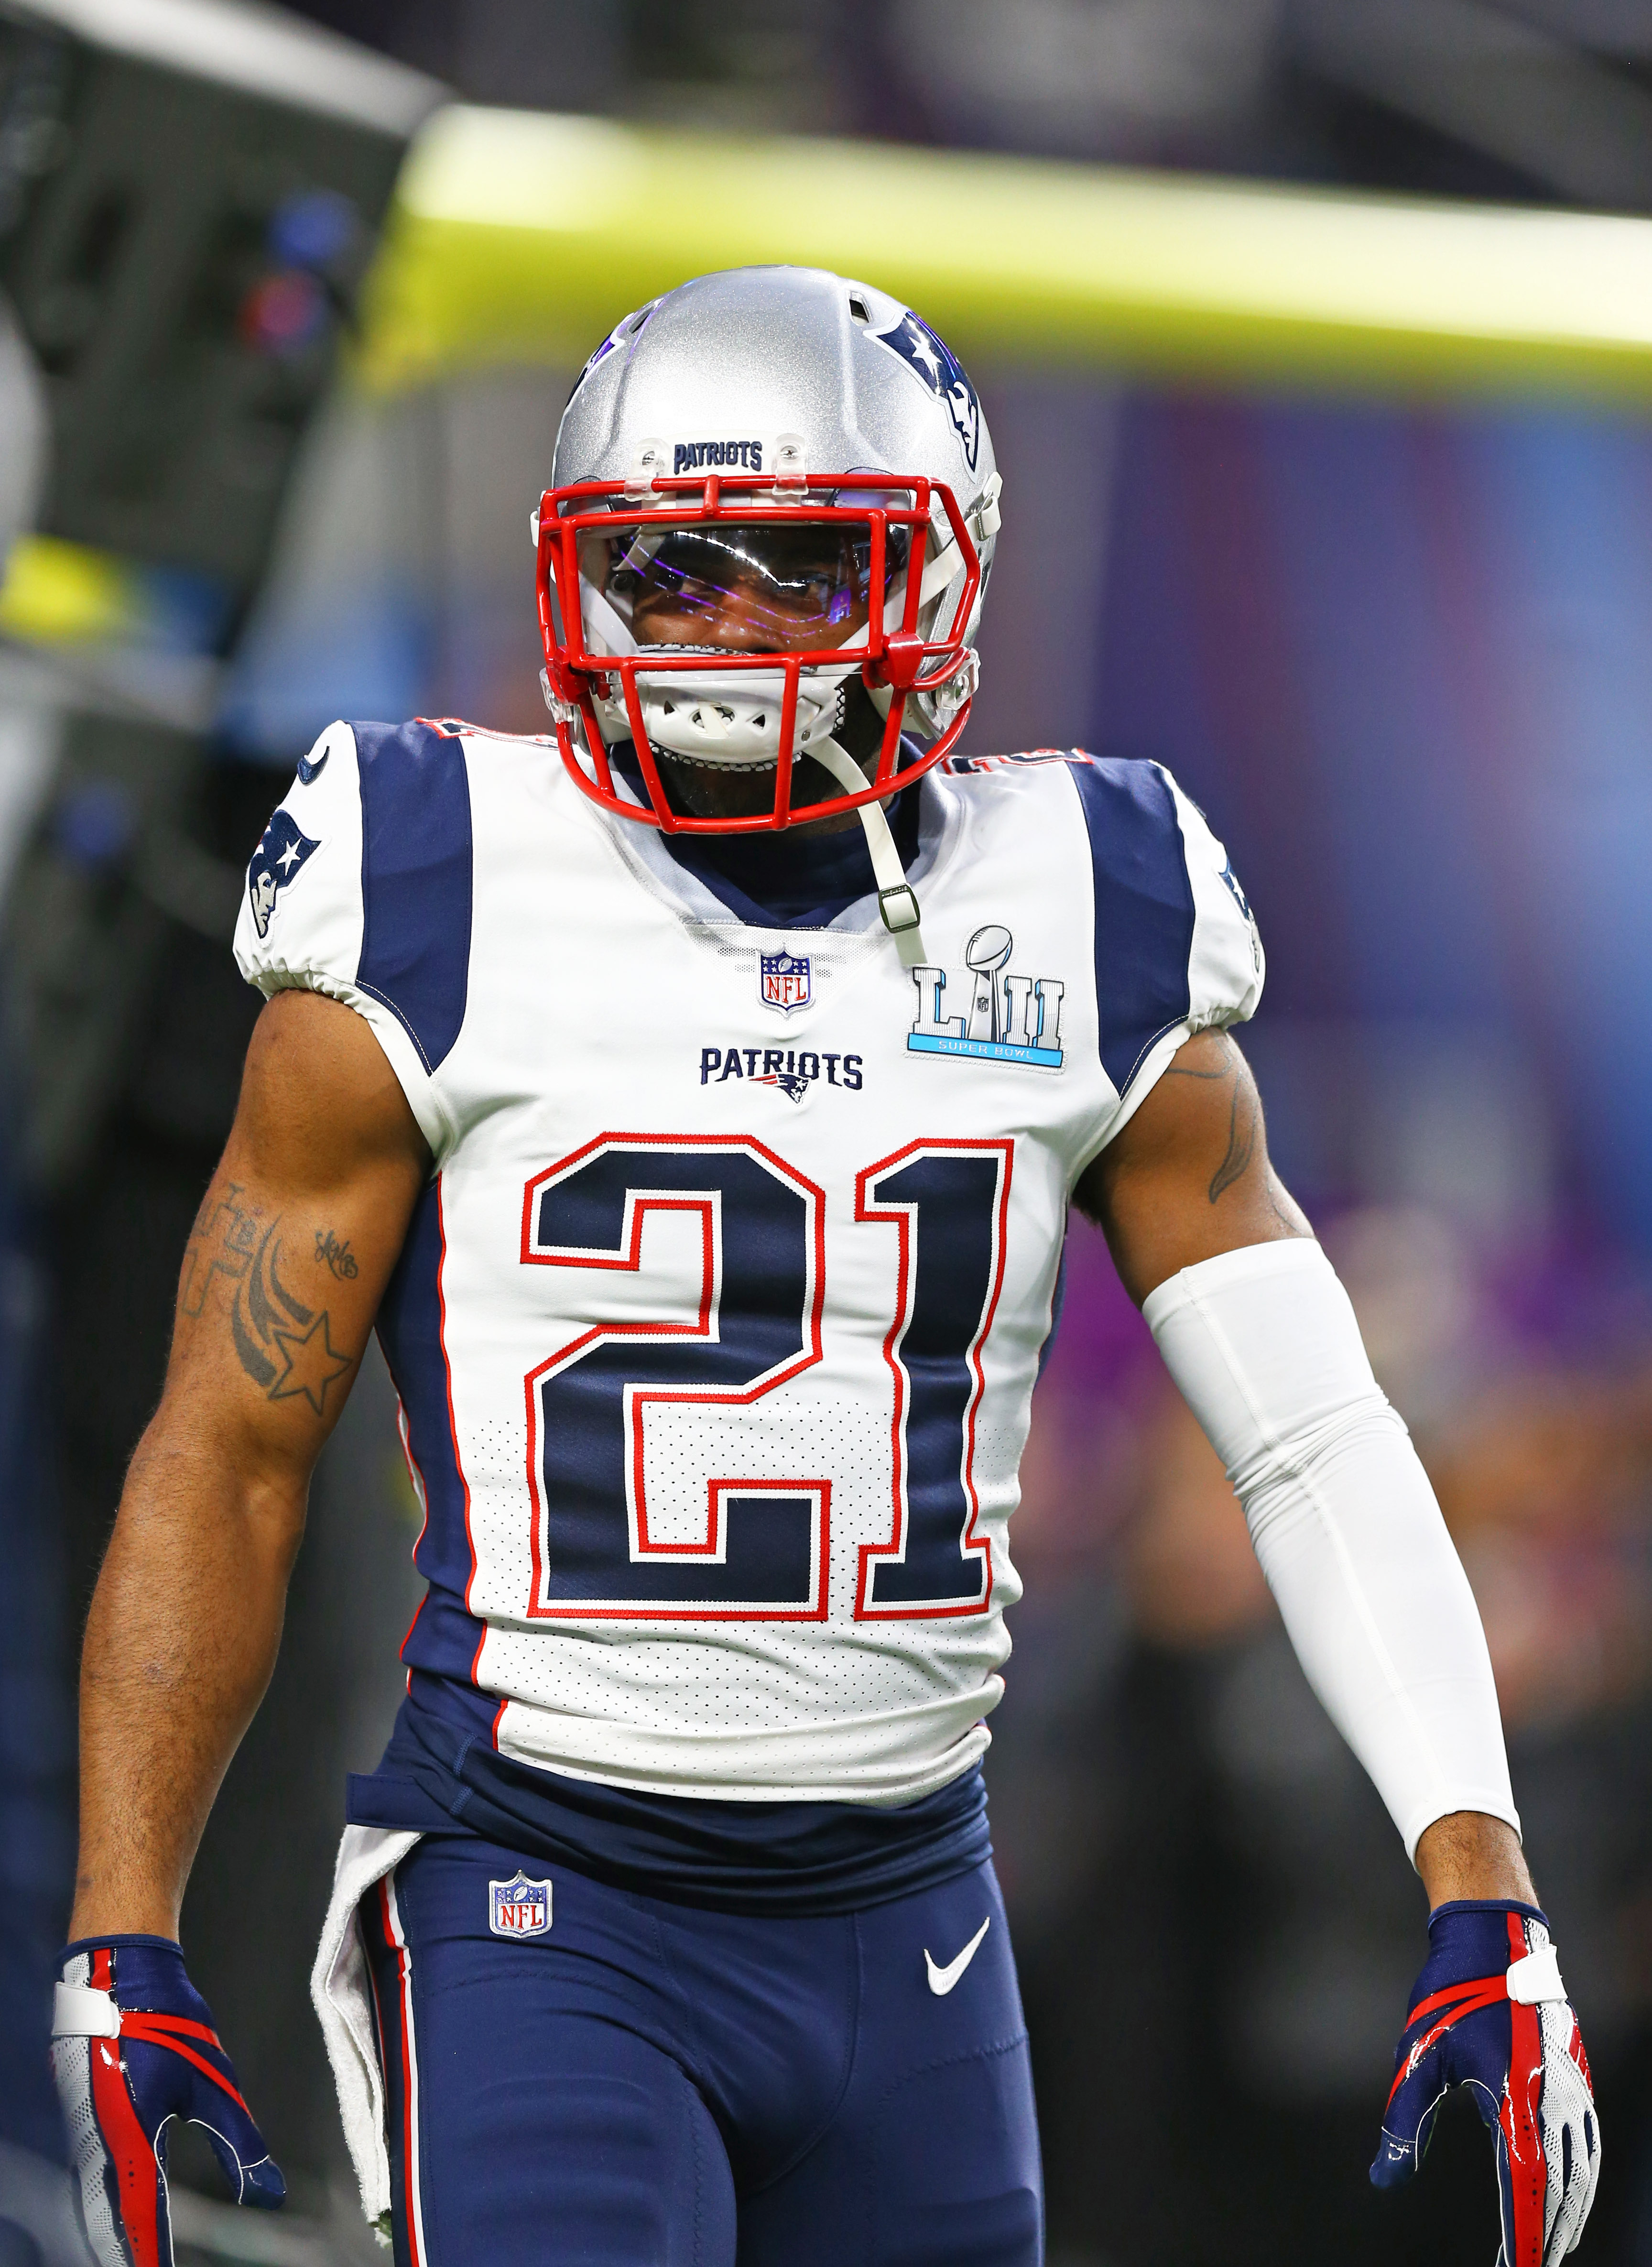 Malcolm Butler working 'for everything' in new No. 4 Patriots